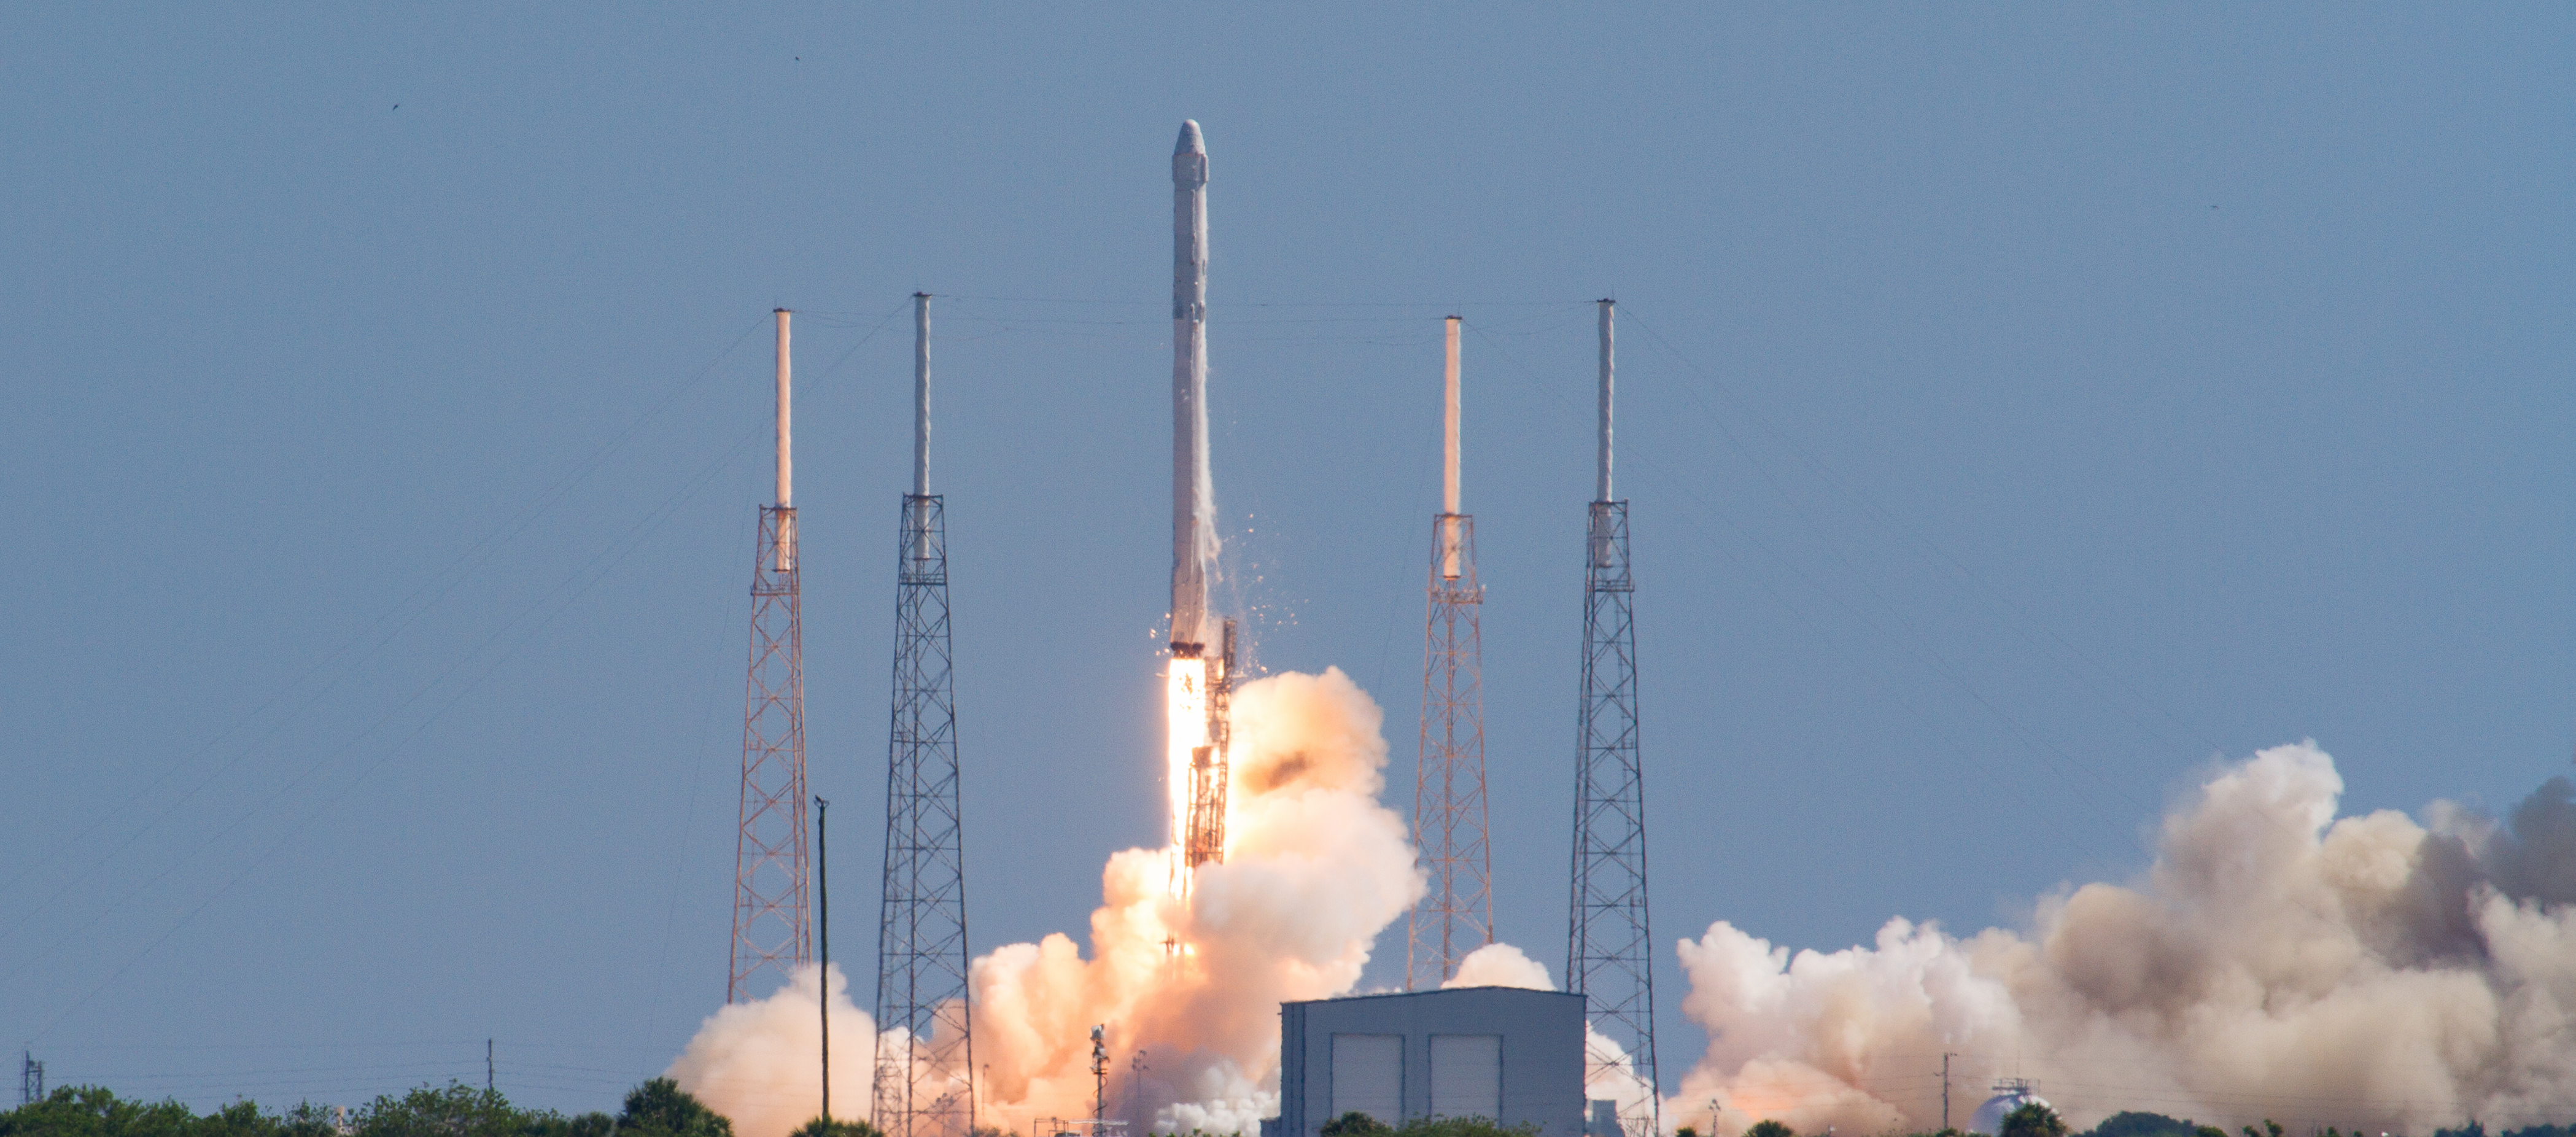 image from Running a SaaS Business Actually is Rocket Science